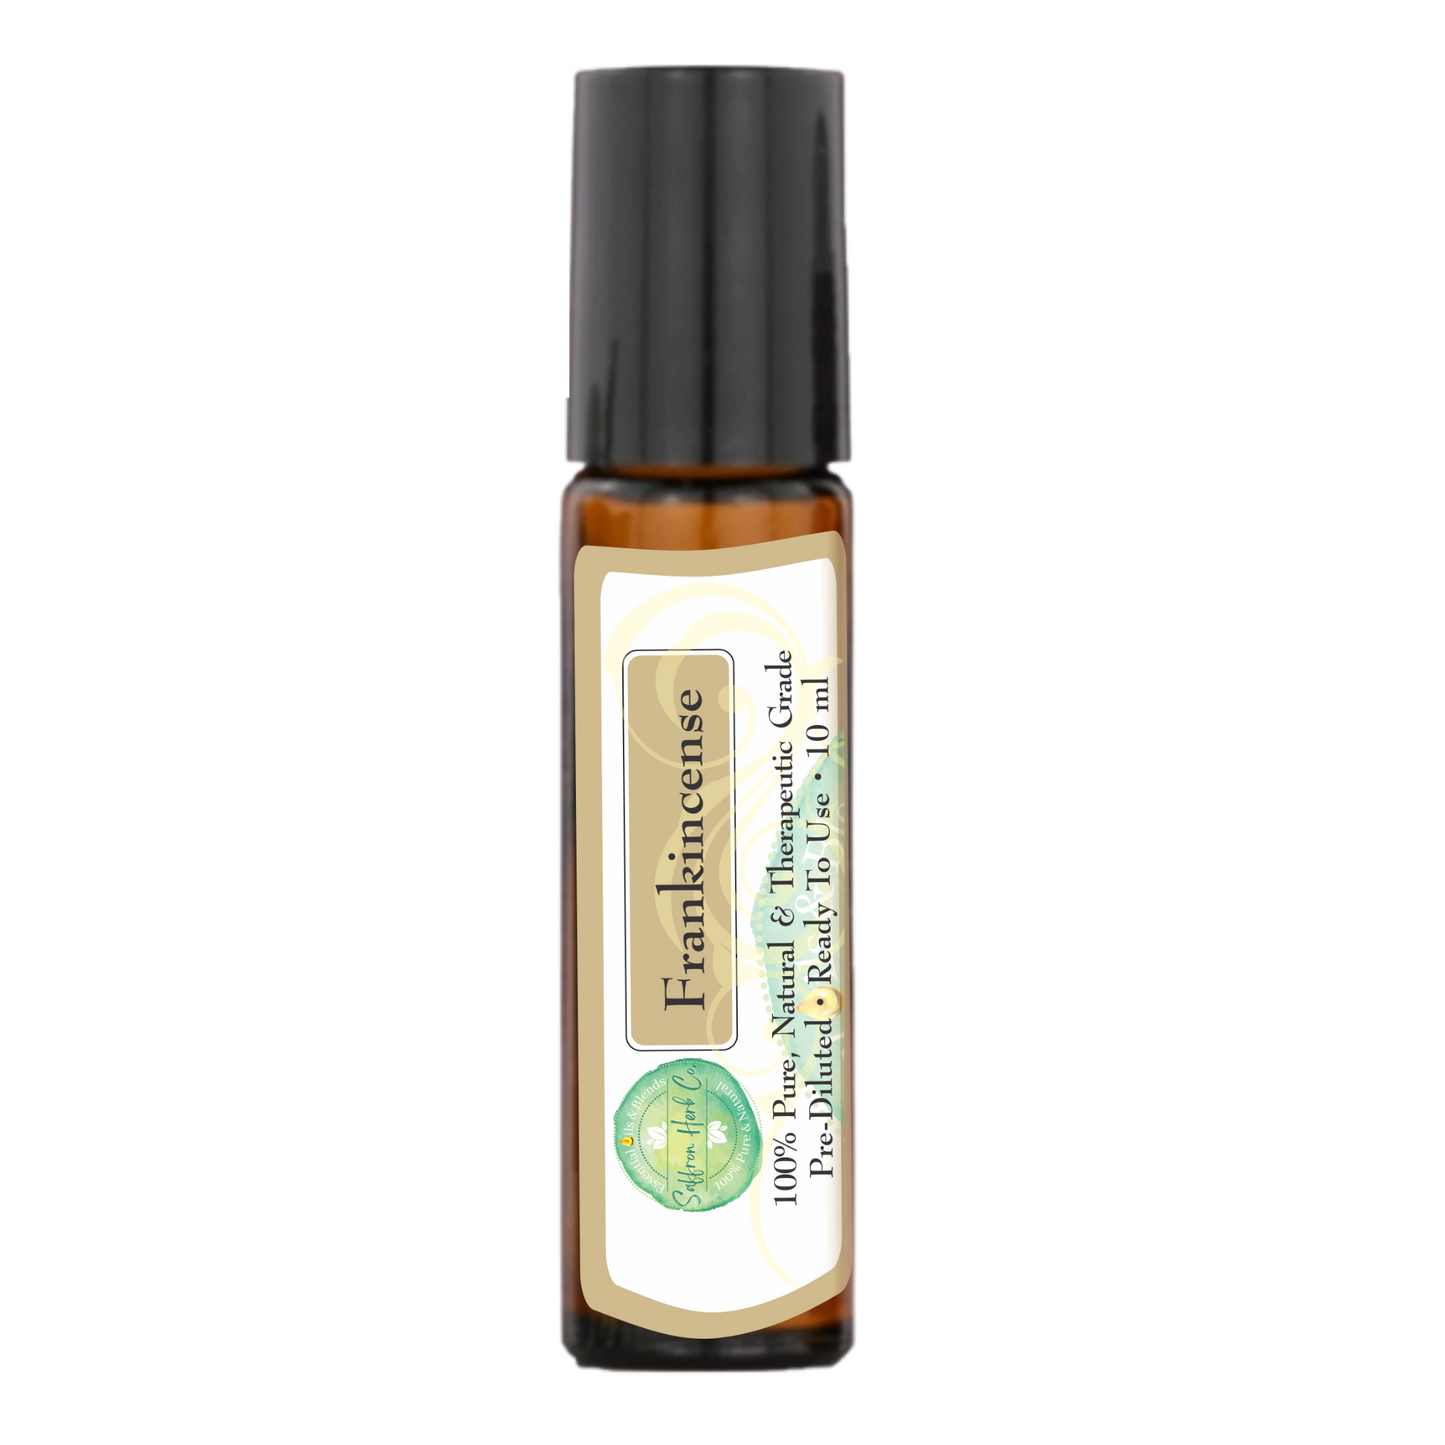 Frankincense Essential Oil Roller Bottle Blend • 100% Pure & Natural • Pre-Diluted • Ready To Use